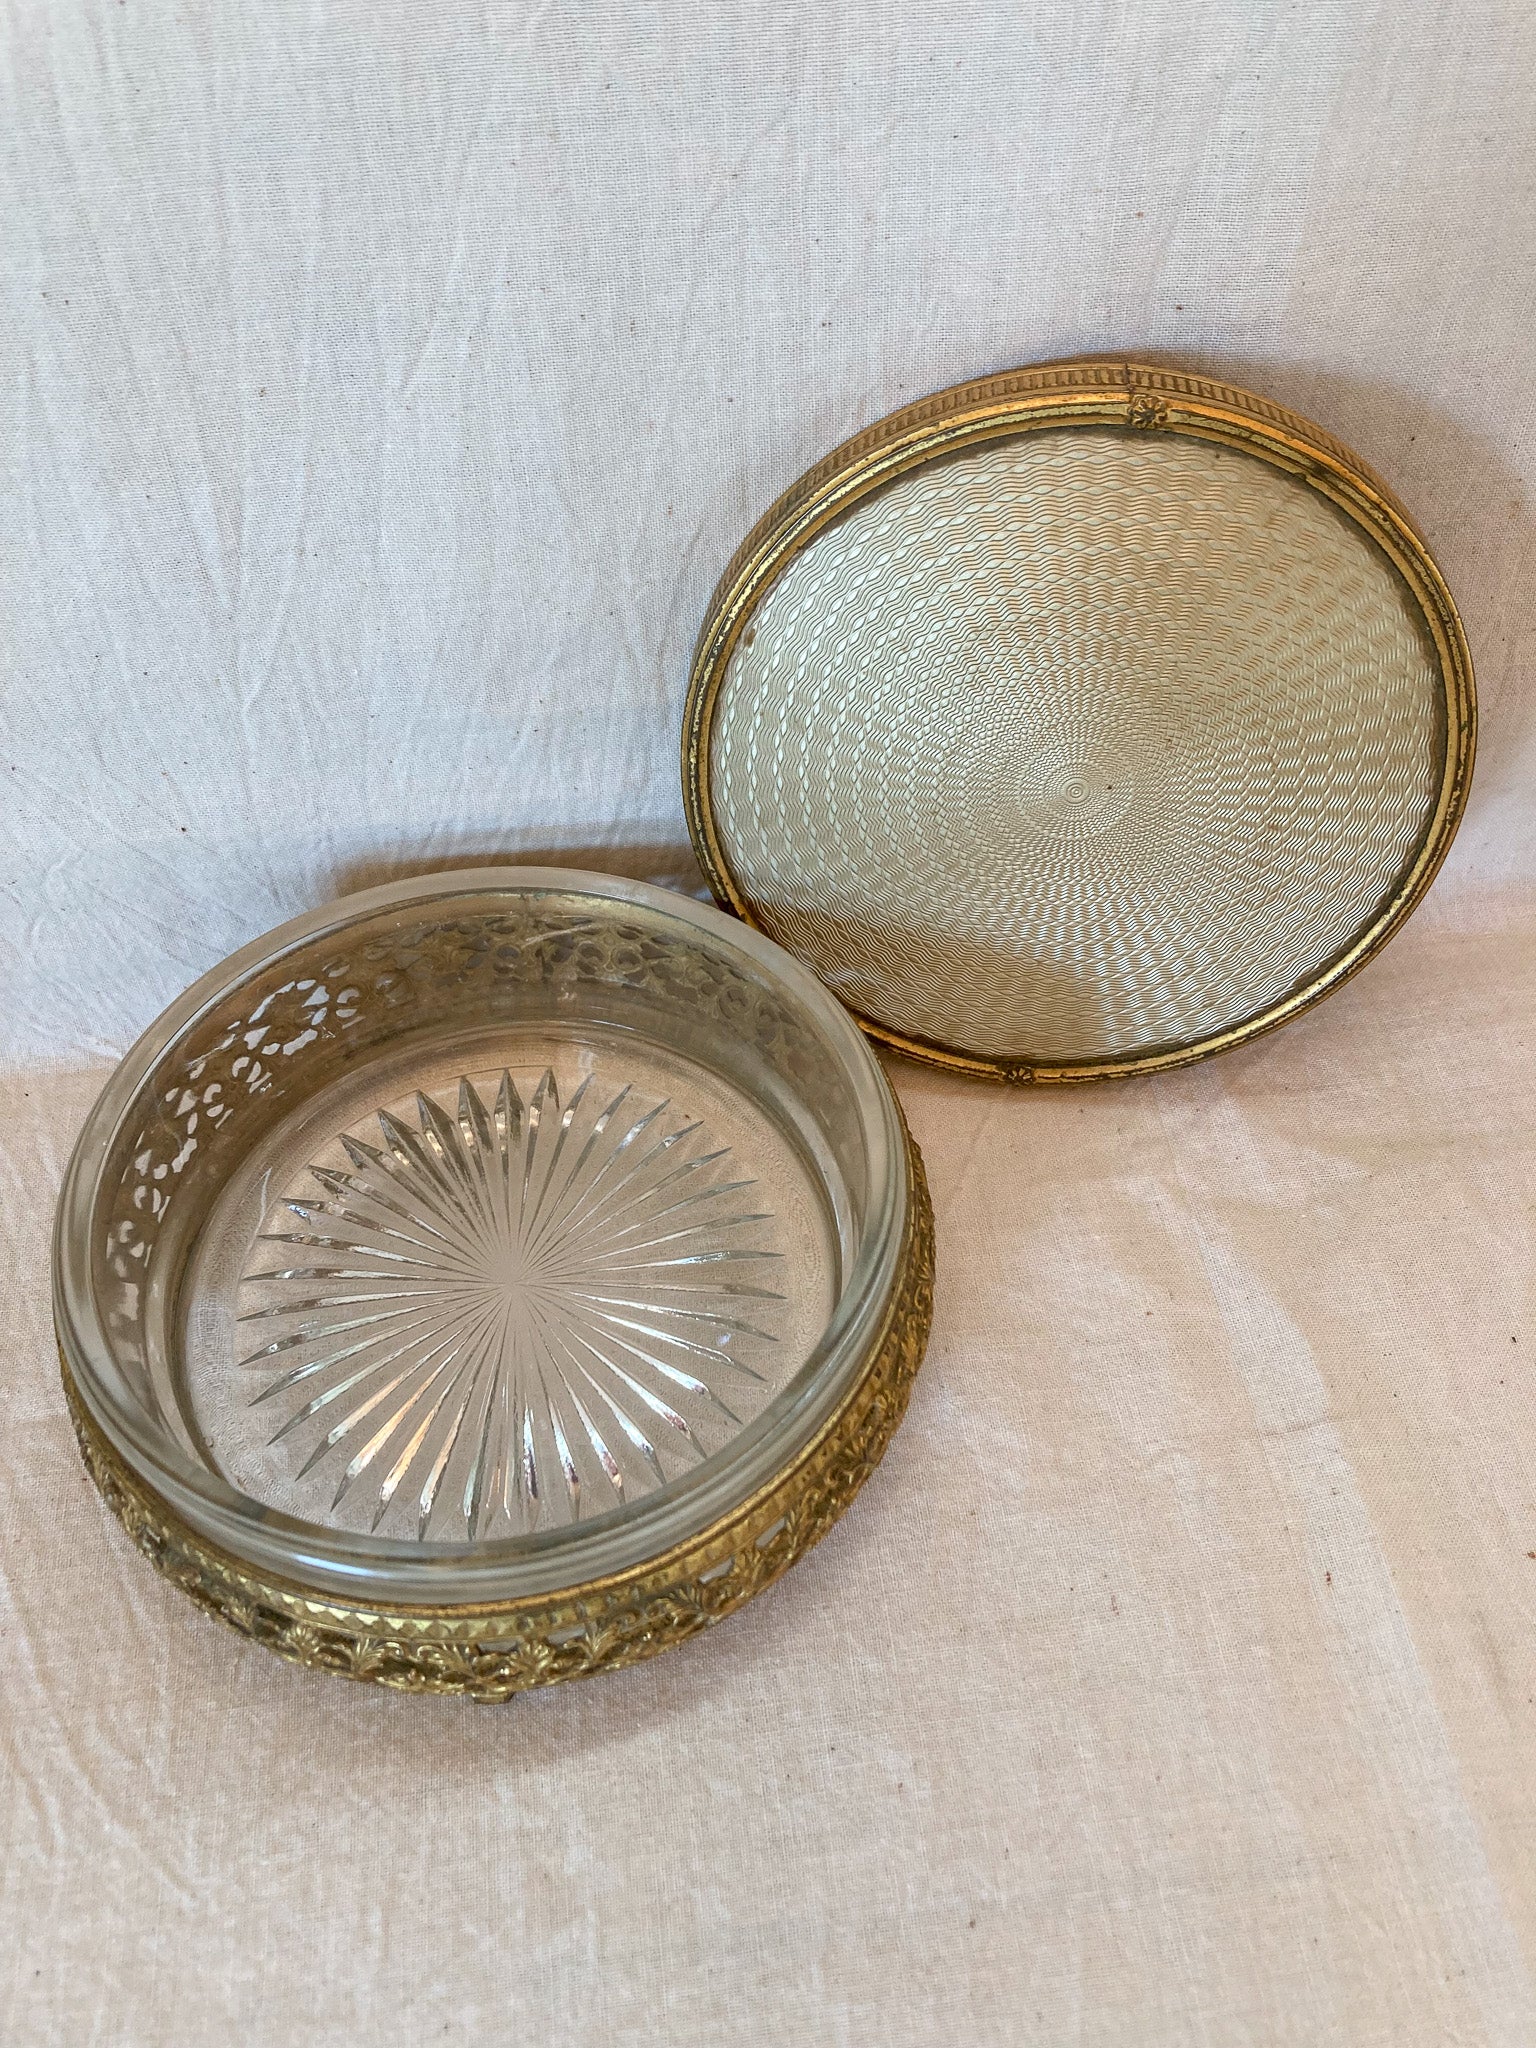 1920’s – 1930’s Glass and Brass Vanity/Powder Box and 1950's Kigu London Compact